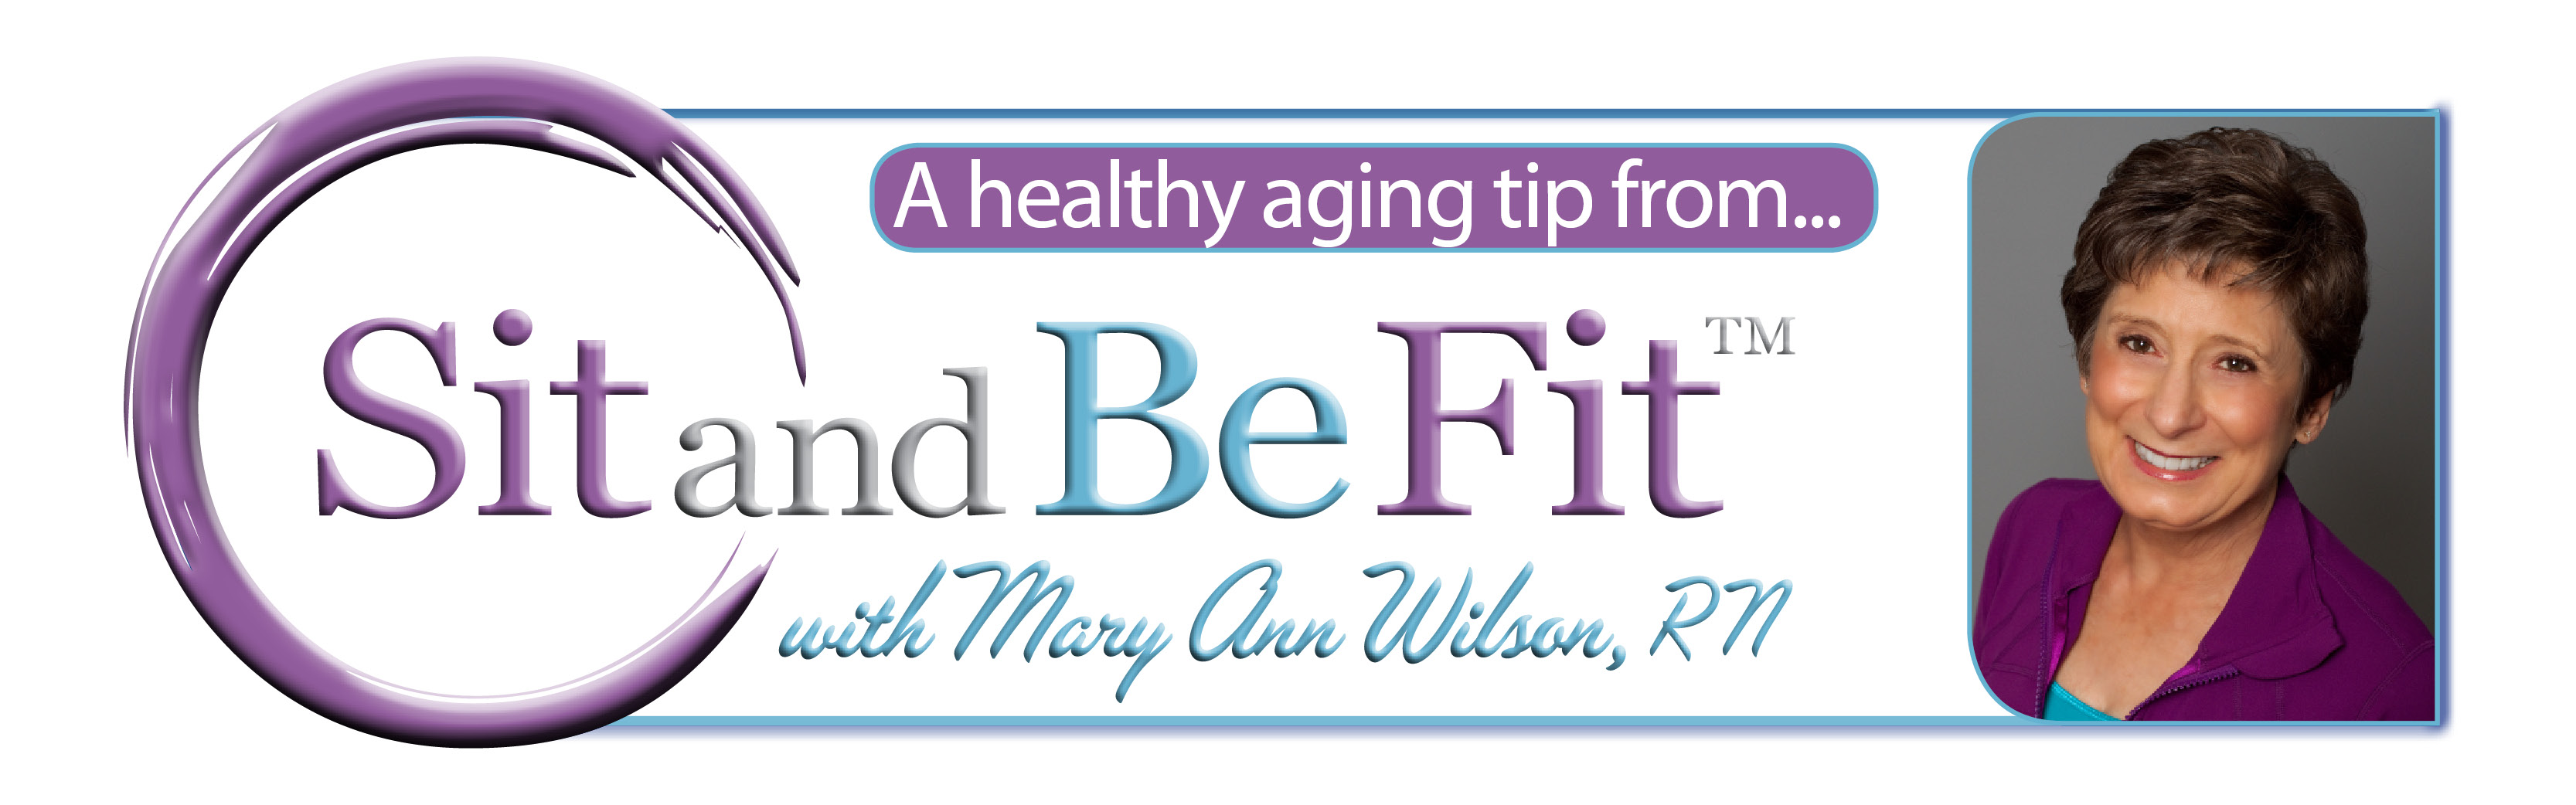 Healthy Aging Tip from Sit and Be Fit TV host, Mary Ann Wilson, RN